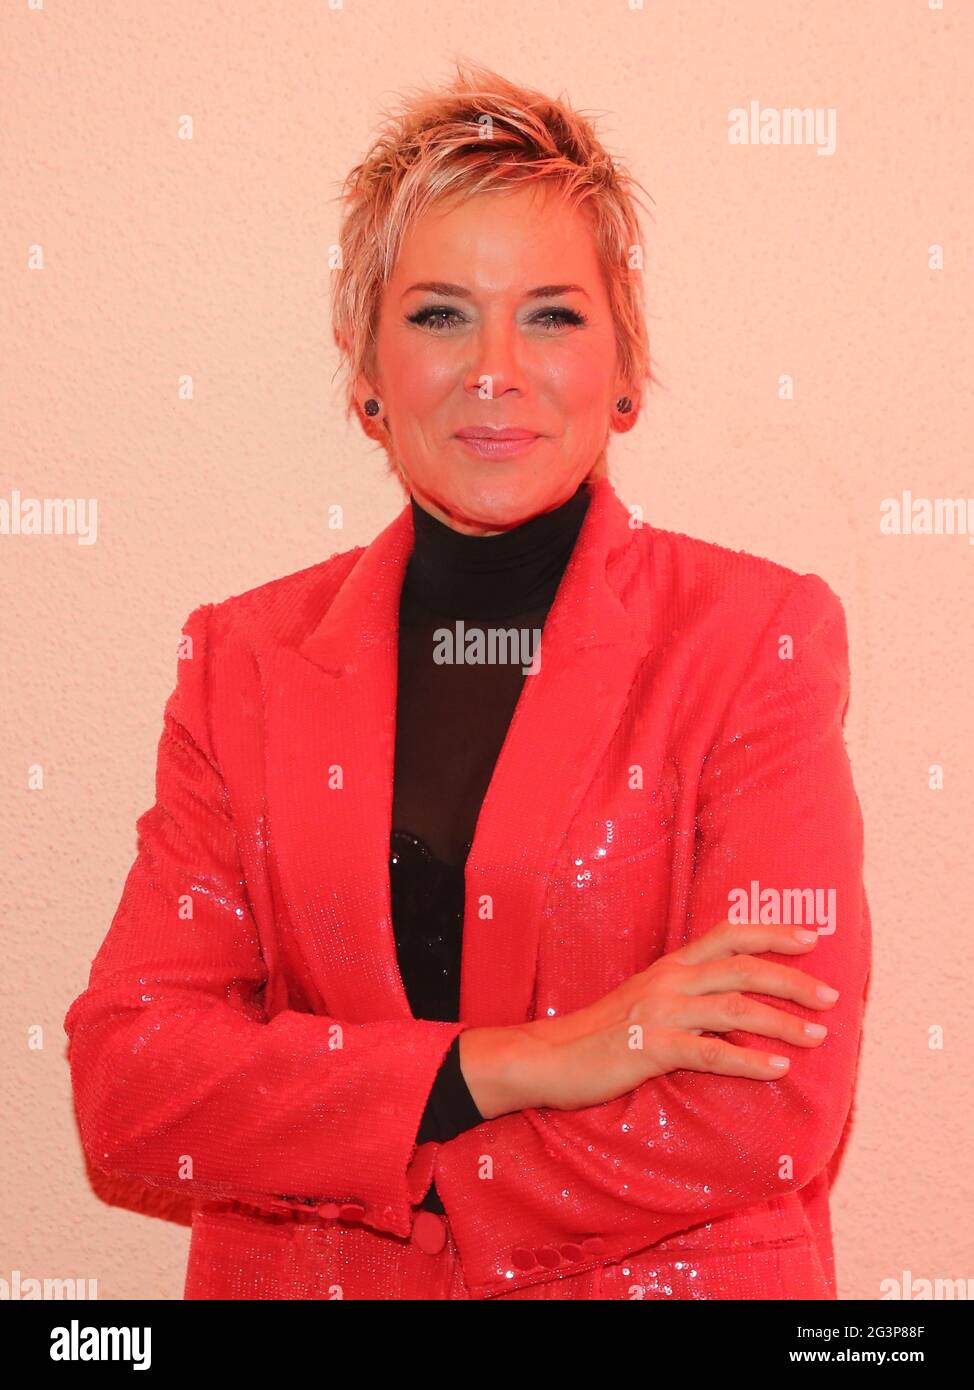 German singer and presenter Inka Bause ARD TV show Advent Festival of 100,000 Lights 11/30/19 Suhl Stock Photo